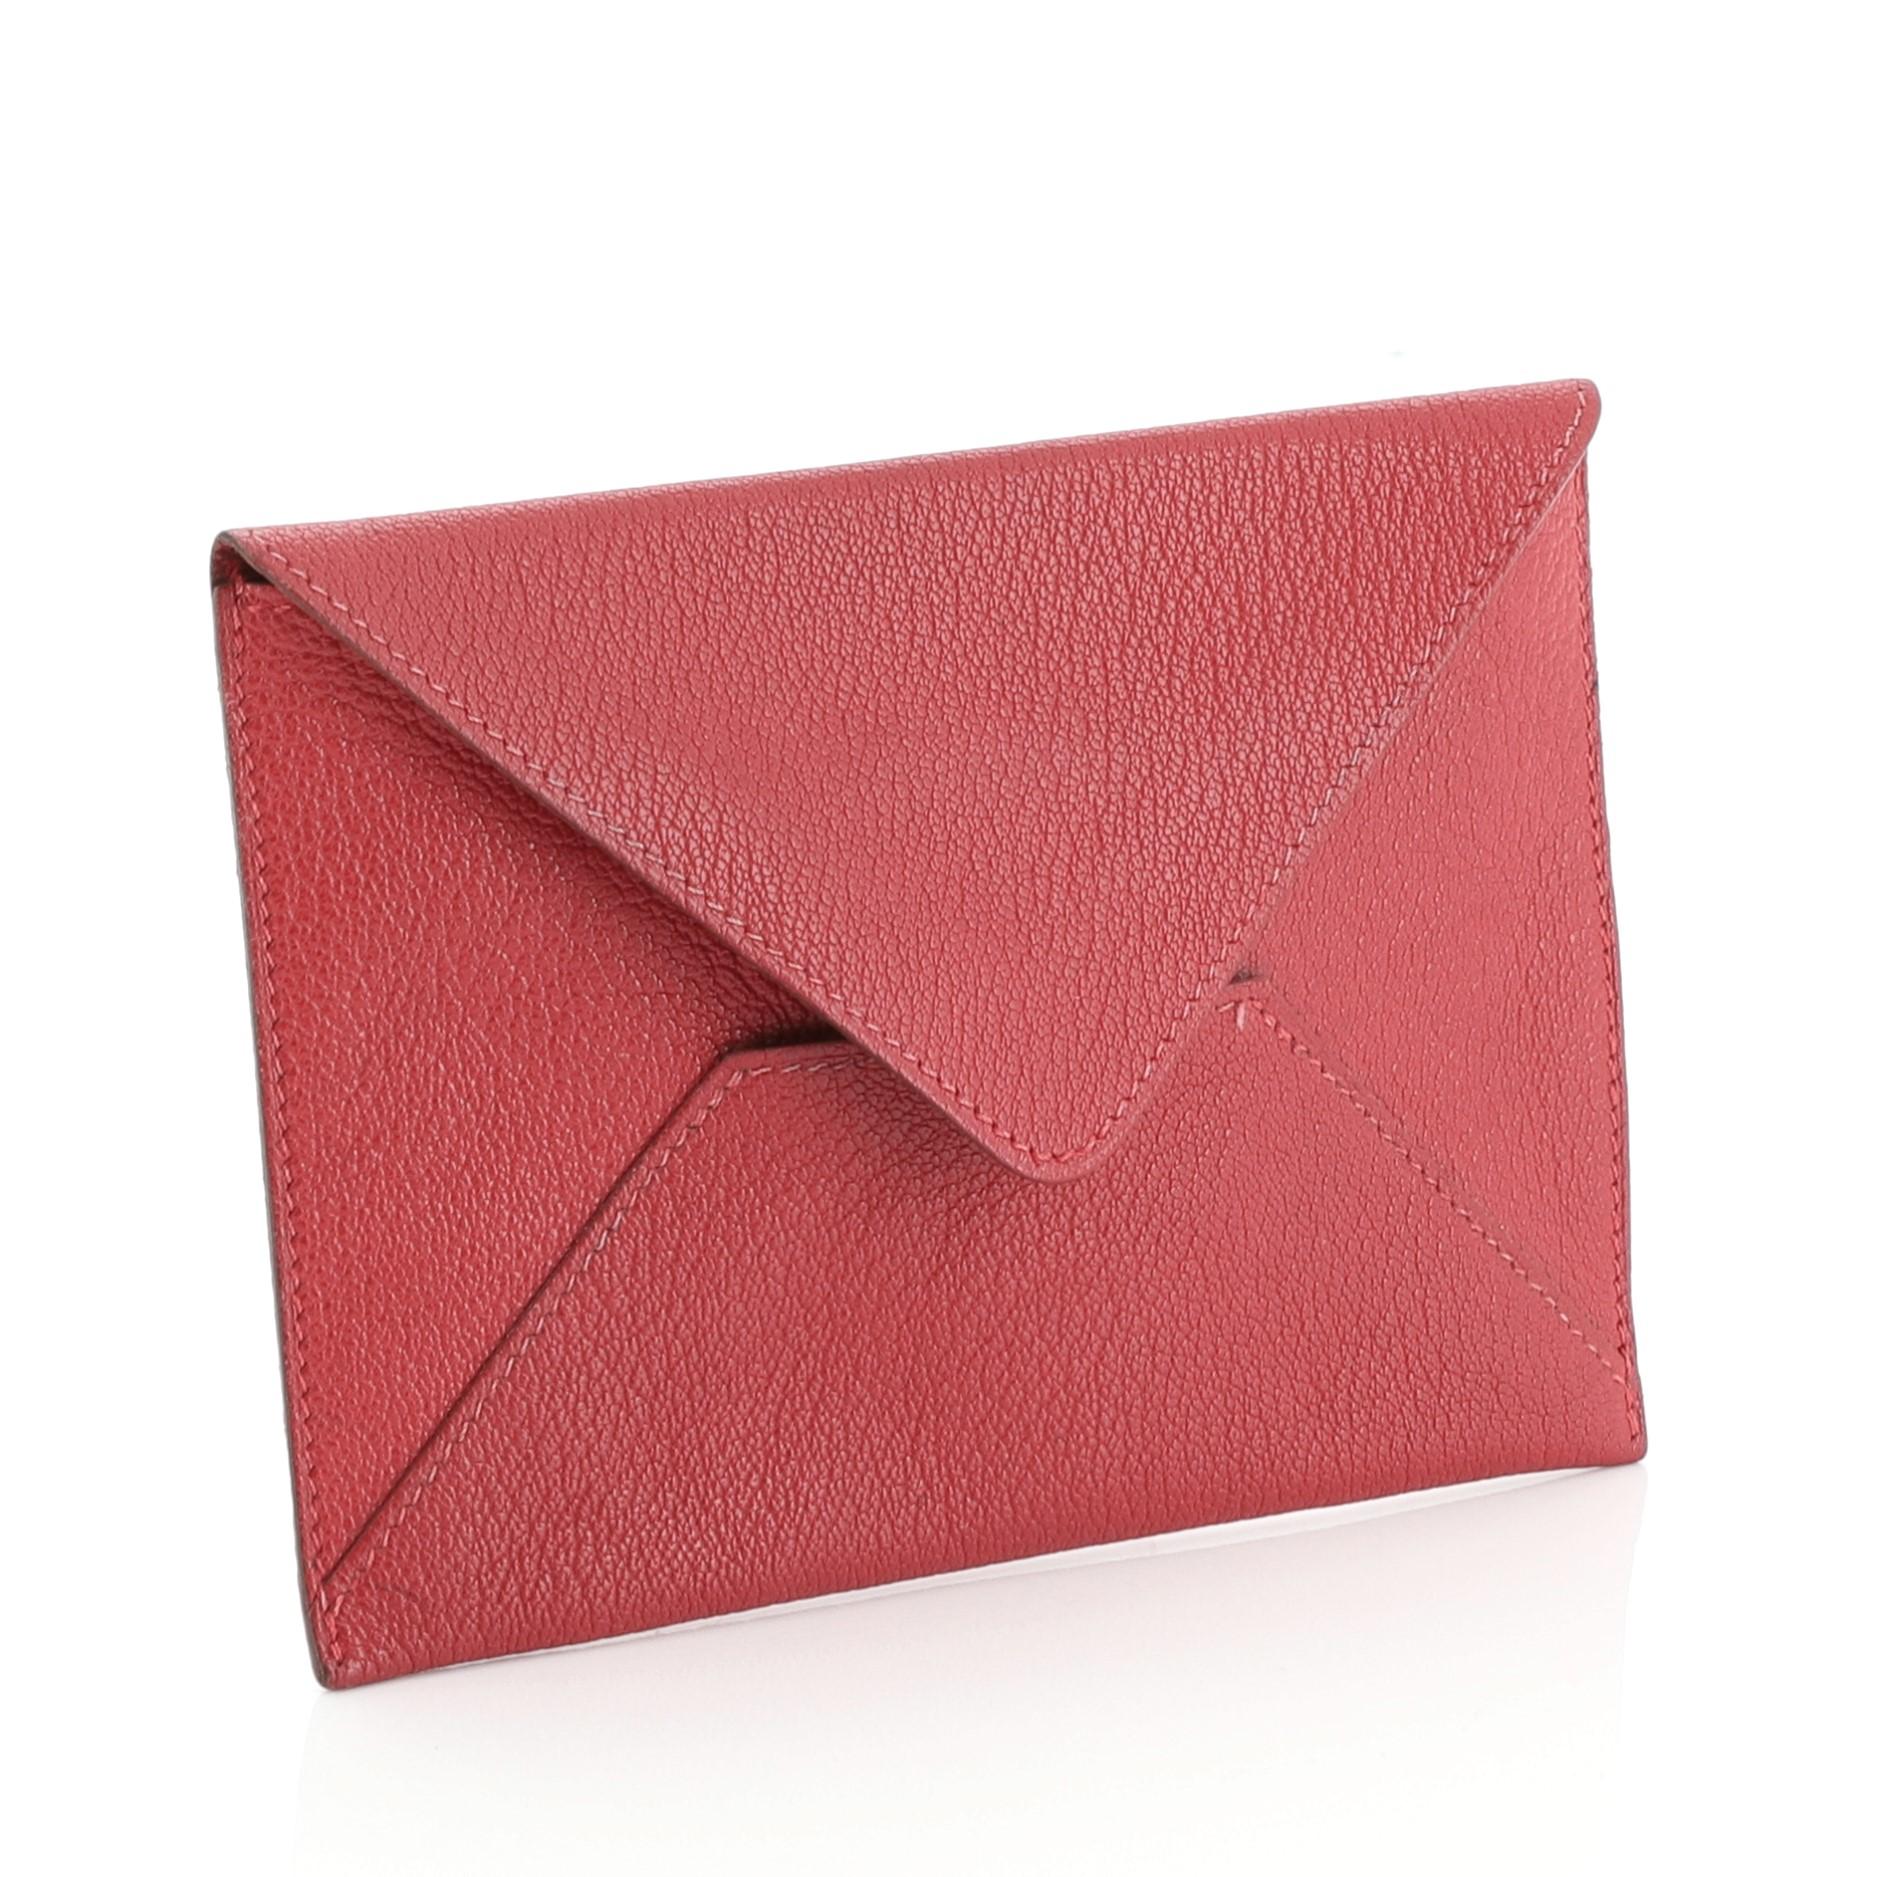 This Hermes Envelope Pouch Leather Large, crafted in Framboise pink Chevre Mysore leather, features an envelope silhouette. It opens to a Framboise pink Chevre Mysore leather interior. Date stamp reads: F Square (2002).

Estimated Retail Price: